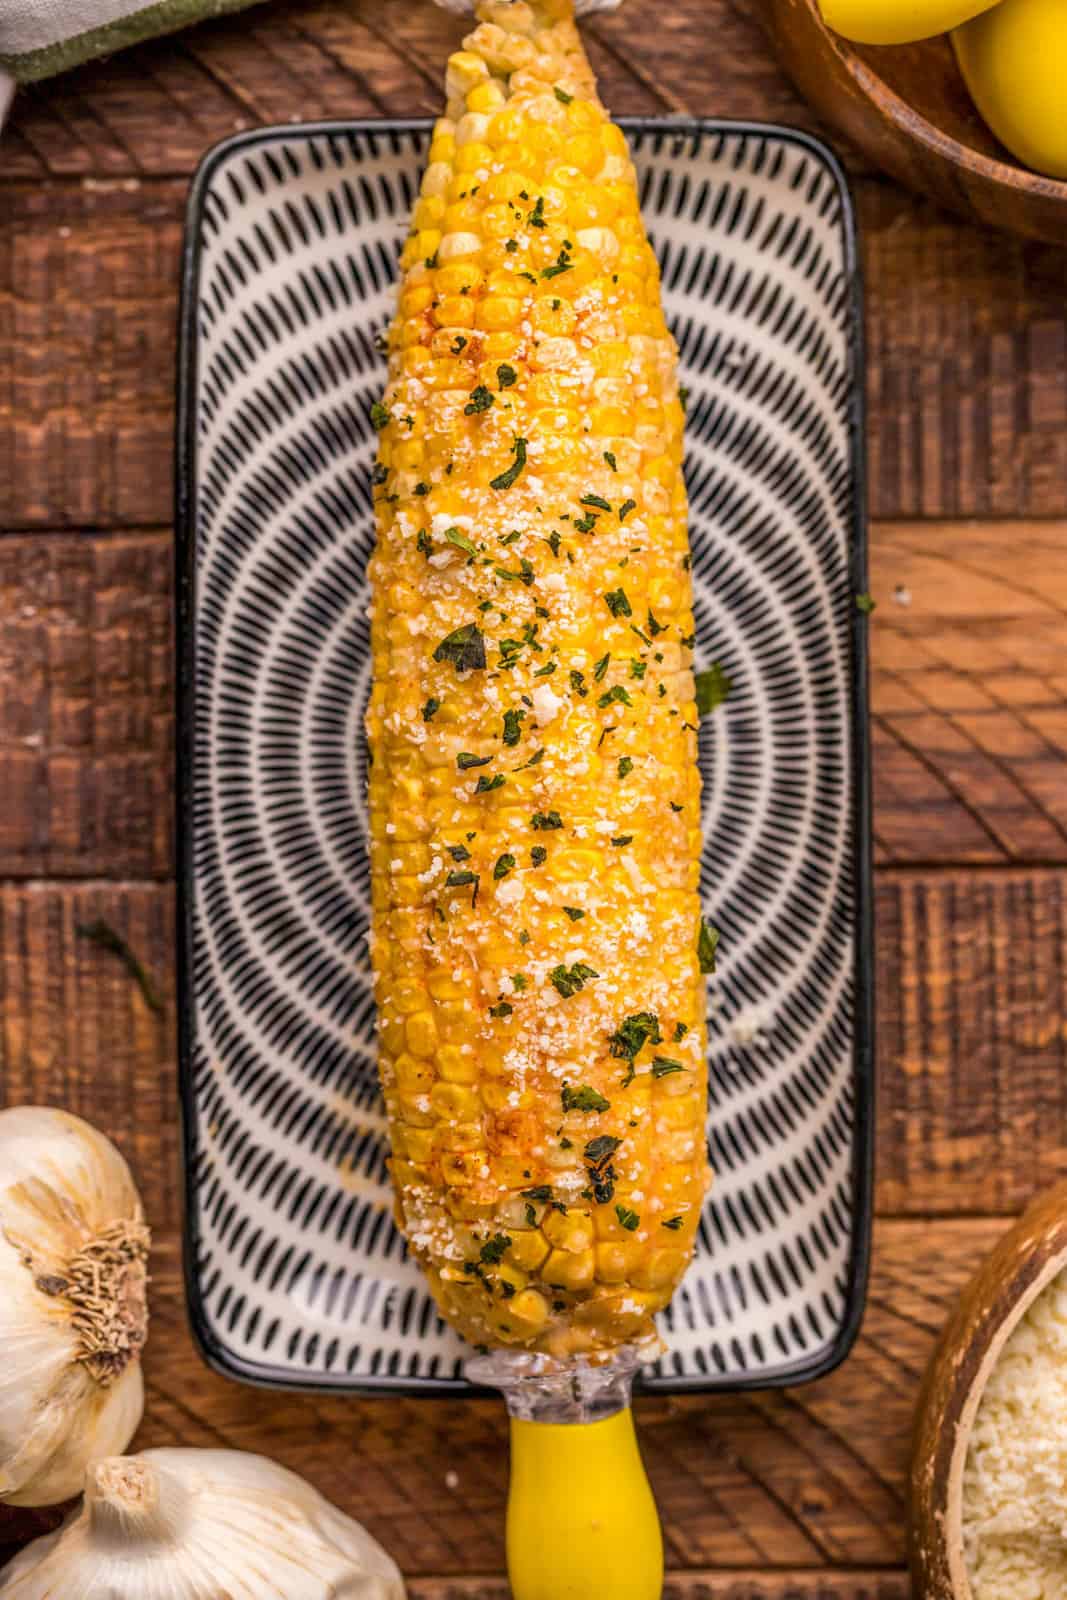 One piece of Smoked Corn on the Cob on small plate.